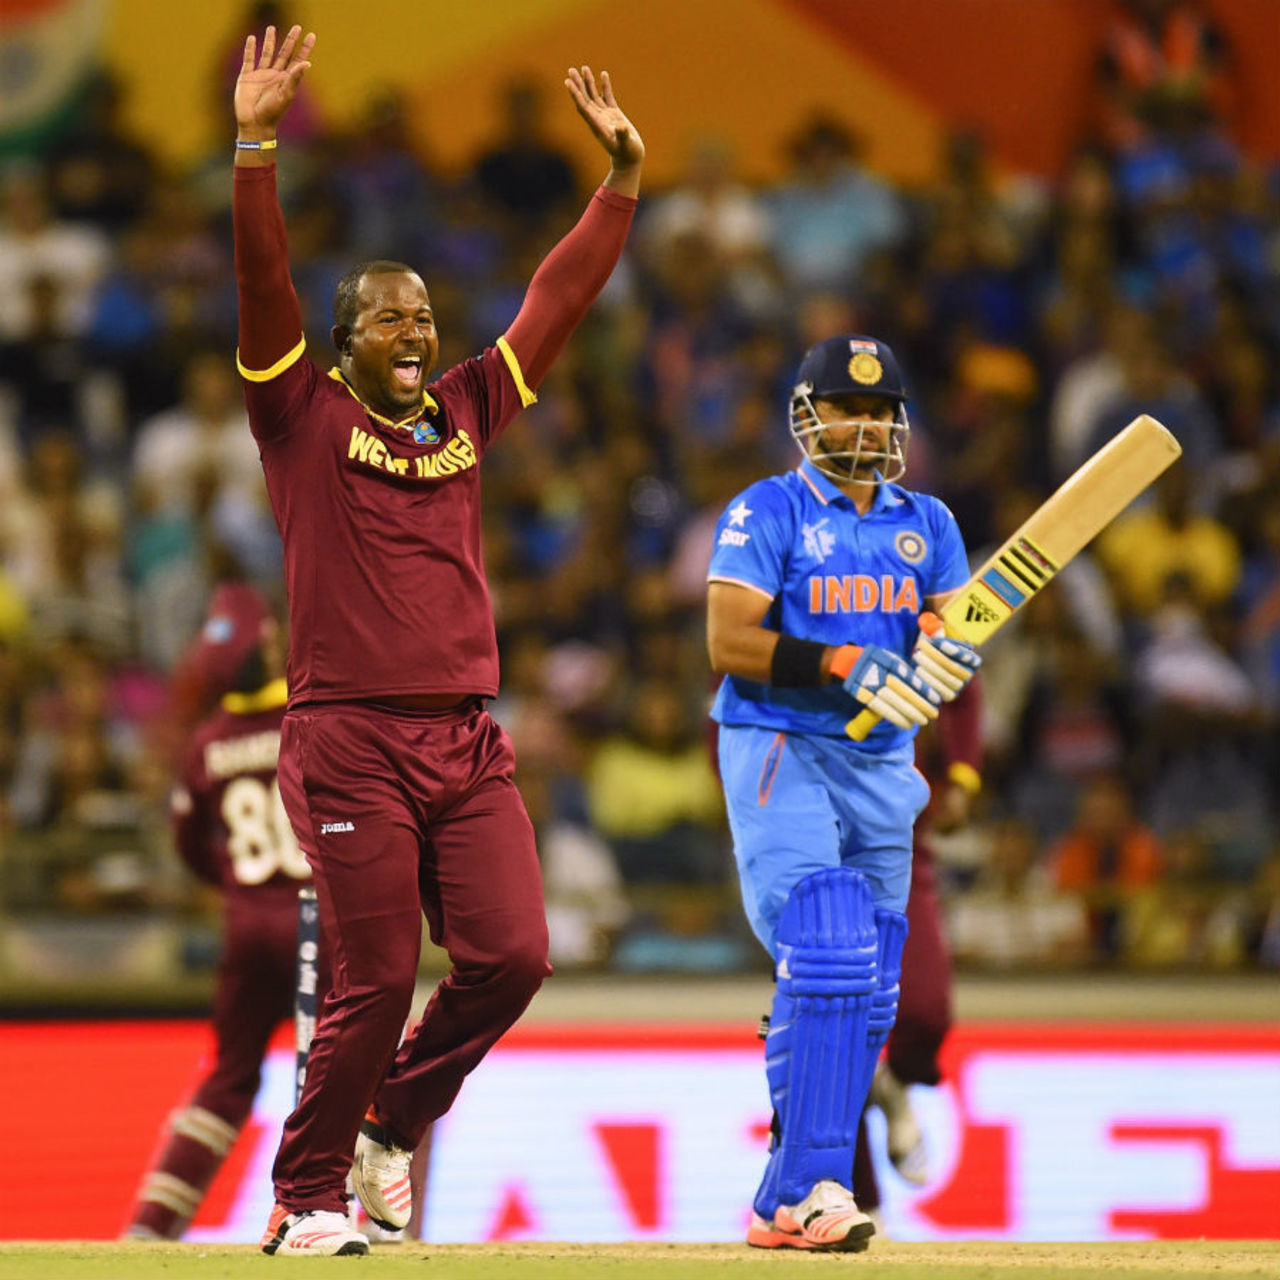 Dwayne Smith had Suresh Raina caught behind for 22, India v West Indies, World Cup 2015, Group B, Perth, March 6